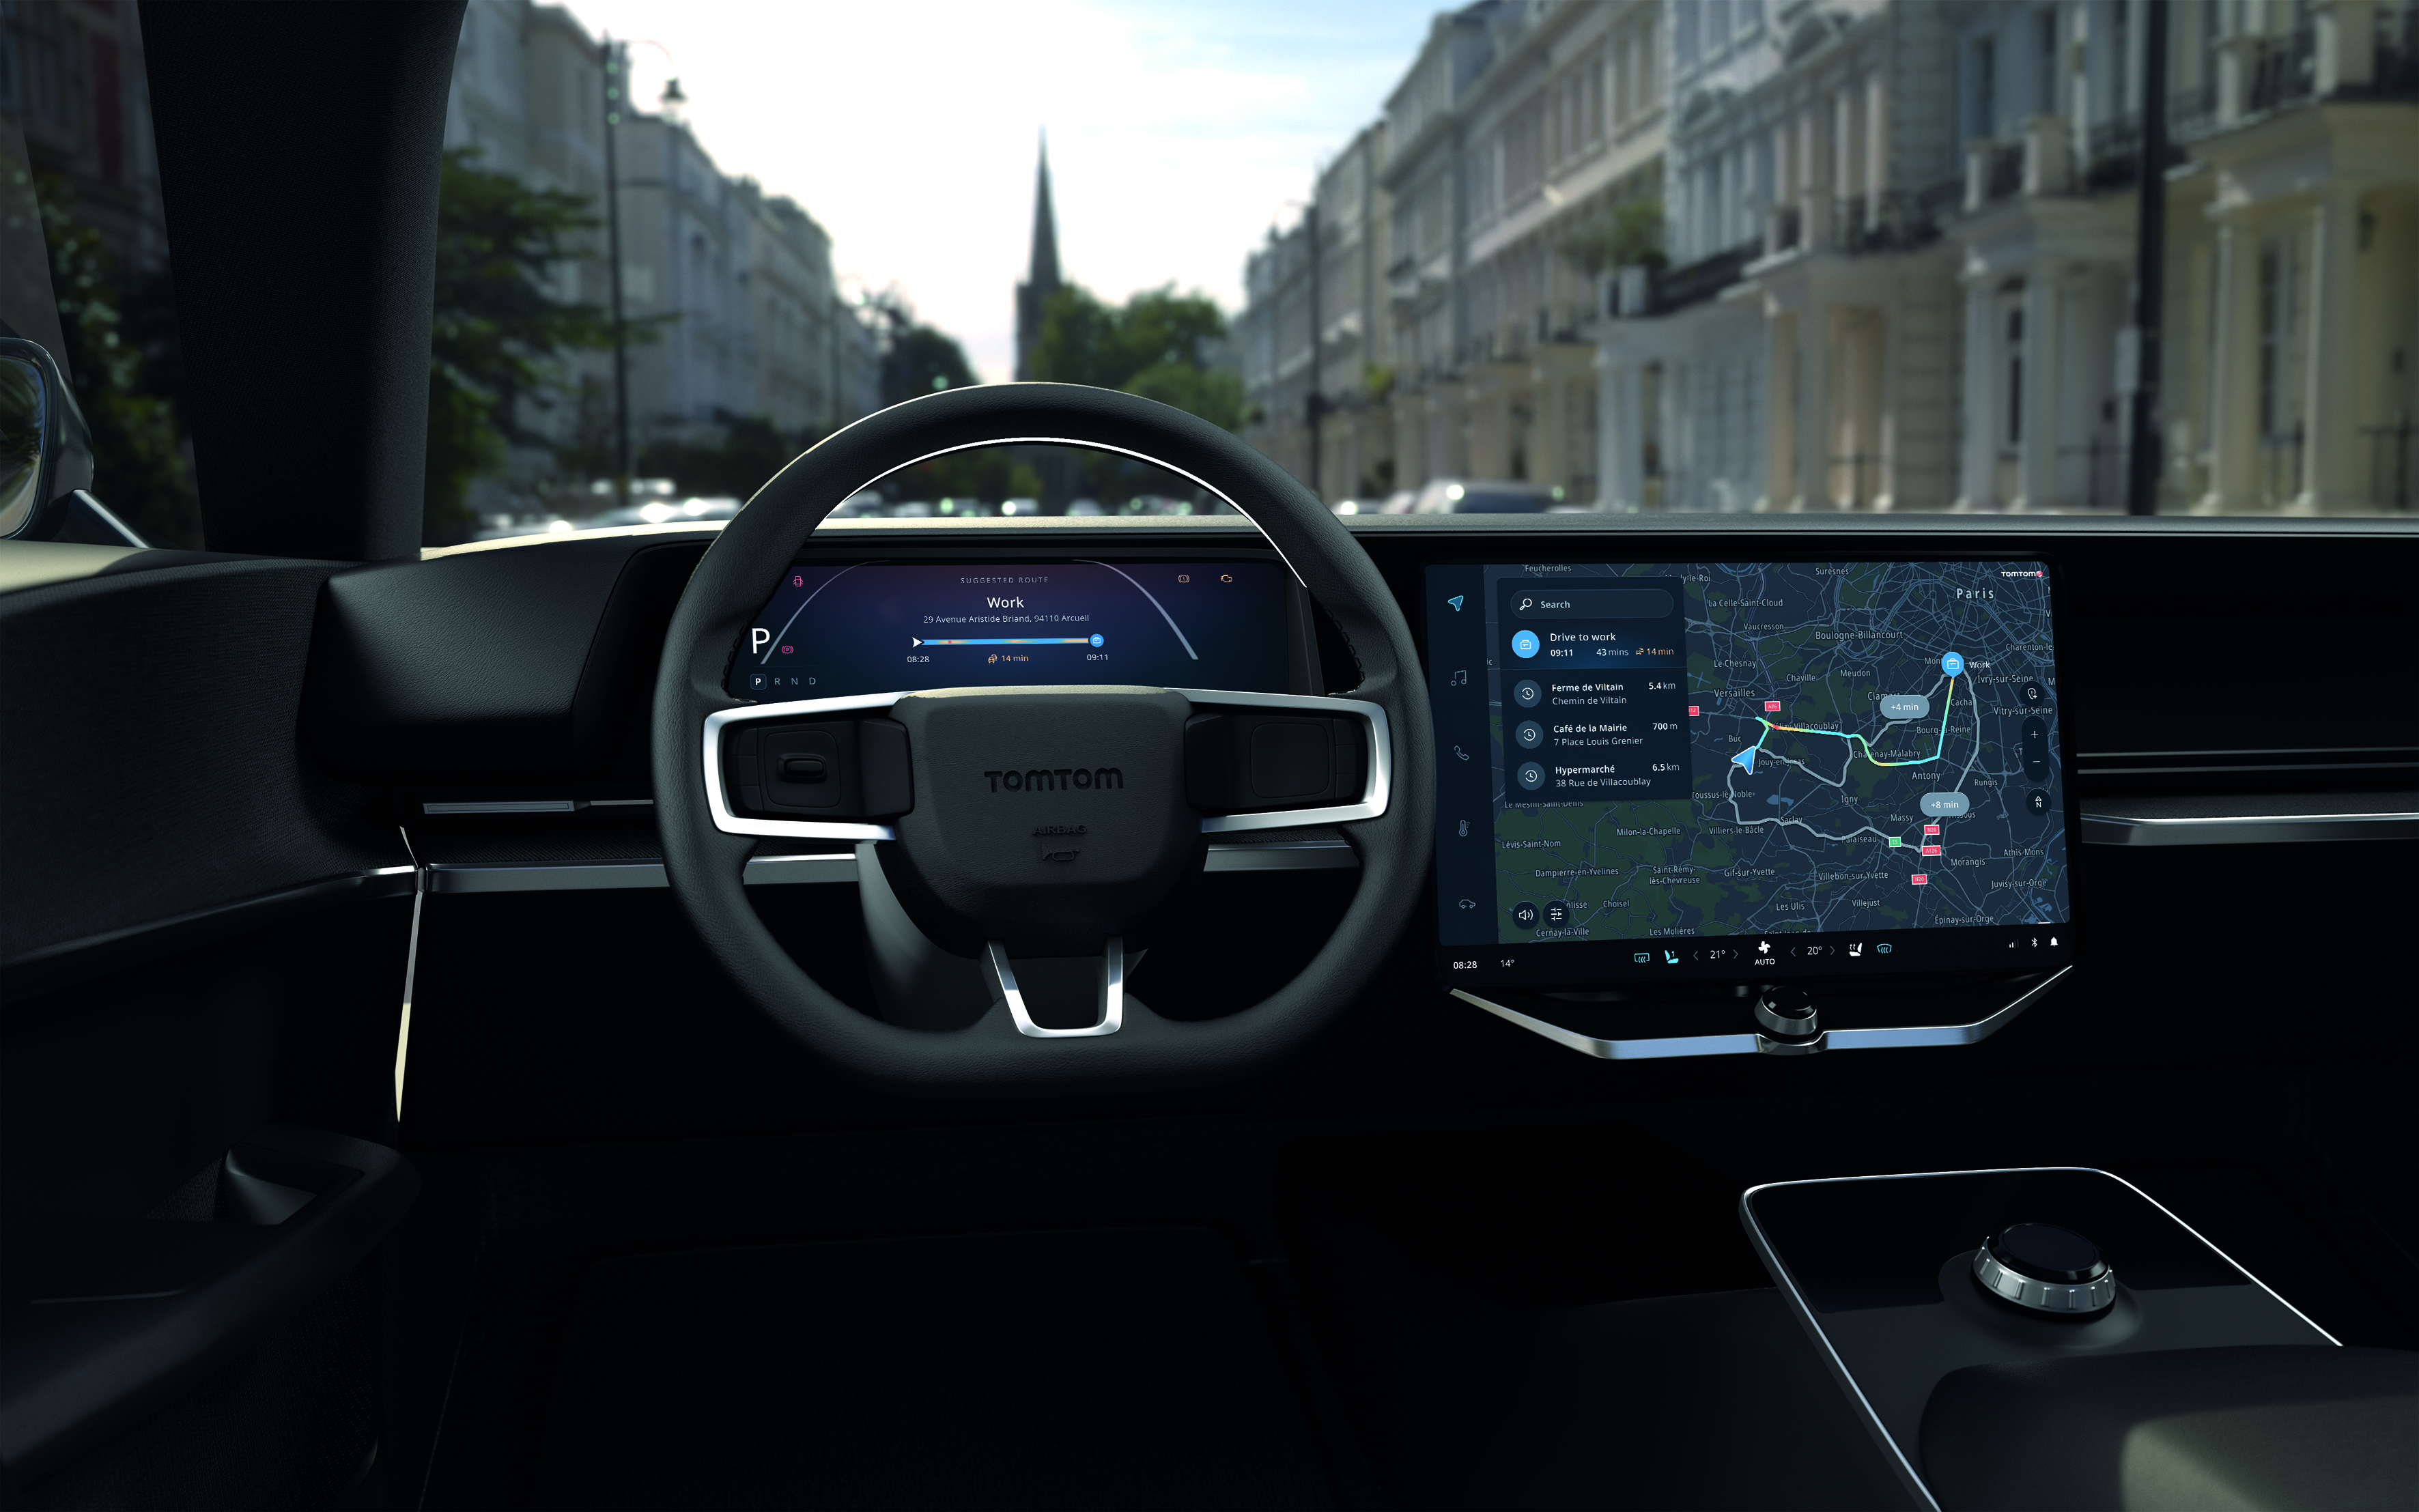 TomTom hybrid navigation routing Amazon electric vehicles